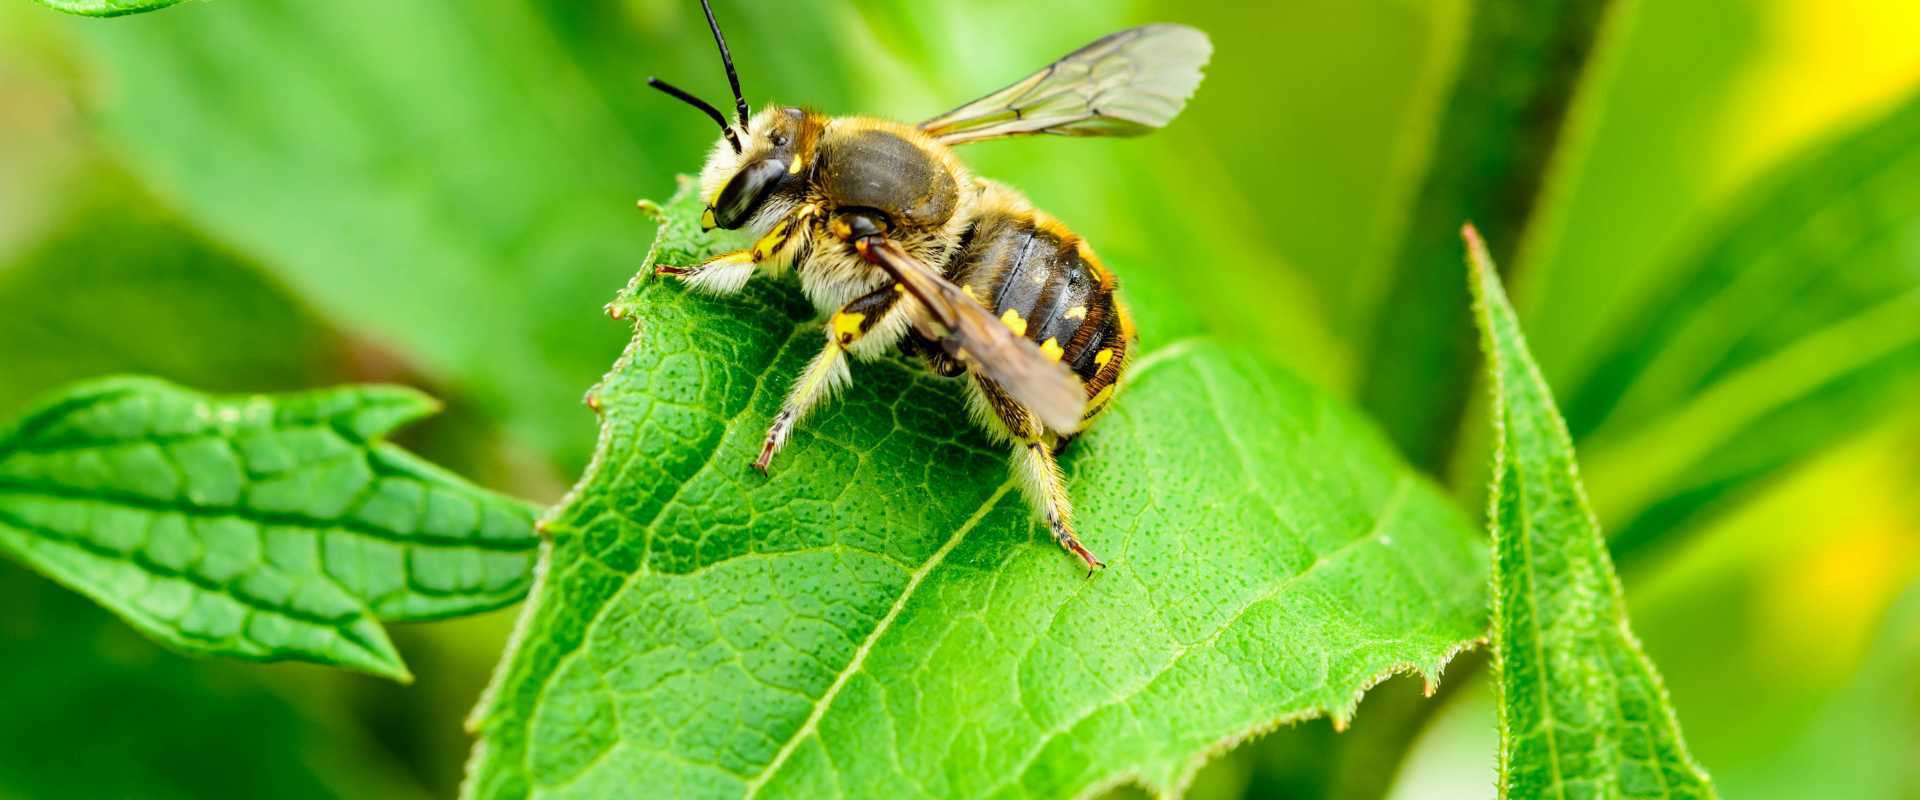 leaf cutter bees